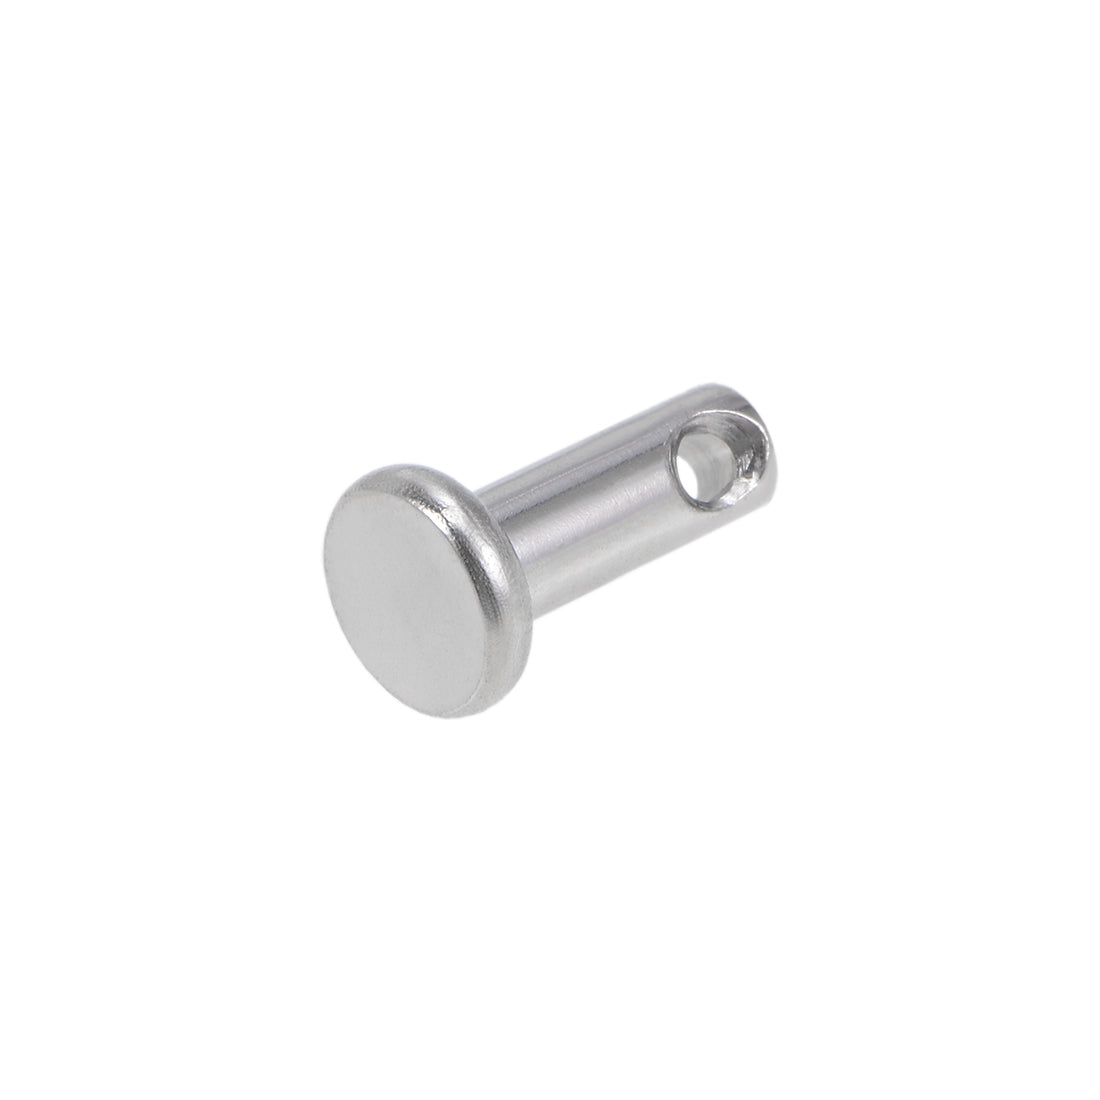 uxcell Uxcell Single Hole Clevis Pins - 3mm x 8mm Flat Head 304 Stainless Steel Link Hinge Pin 20Pcs